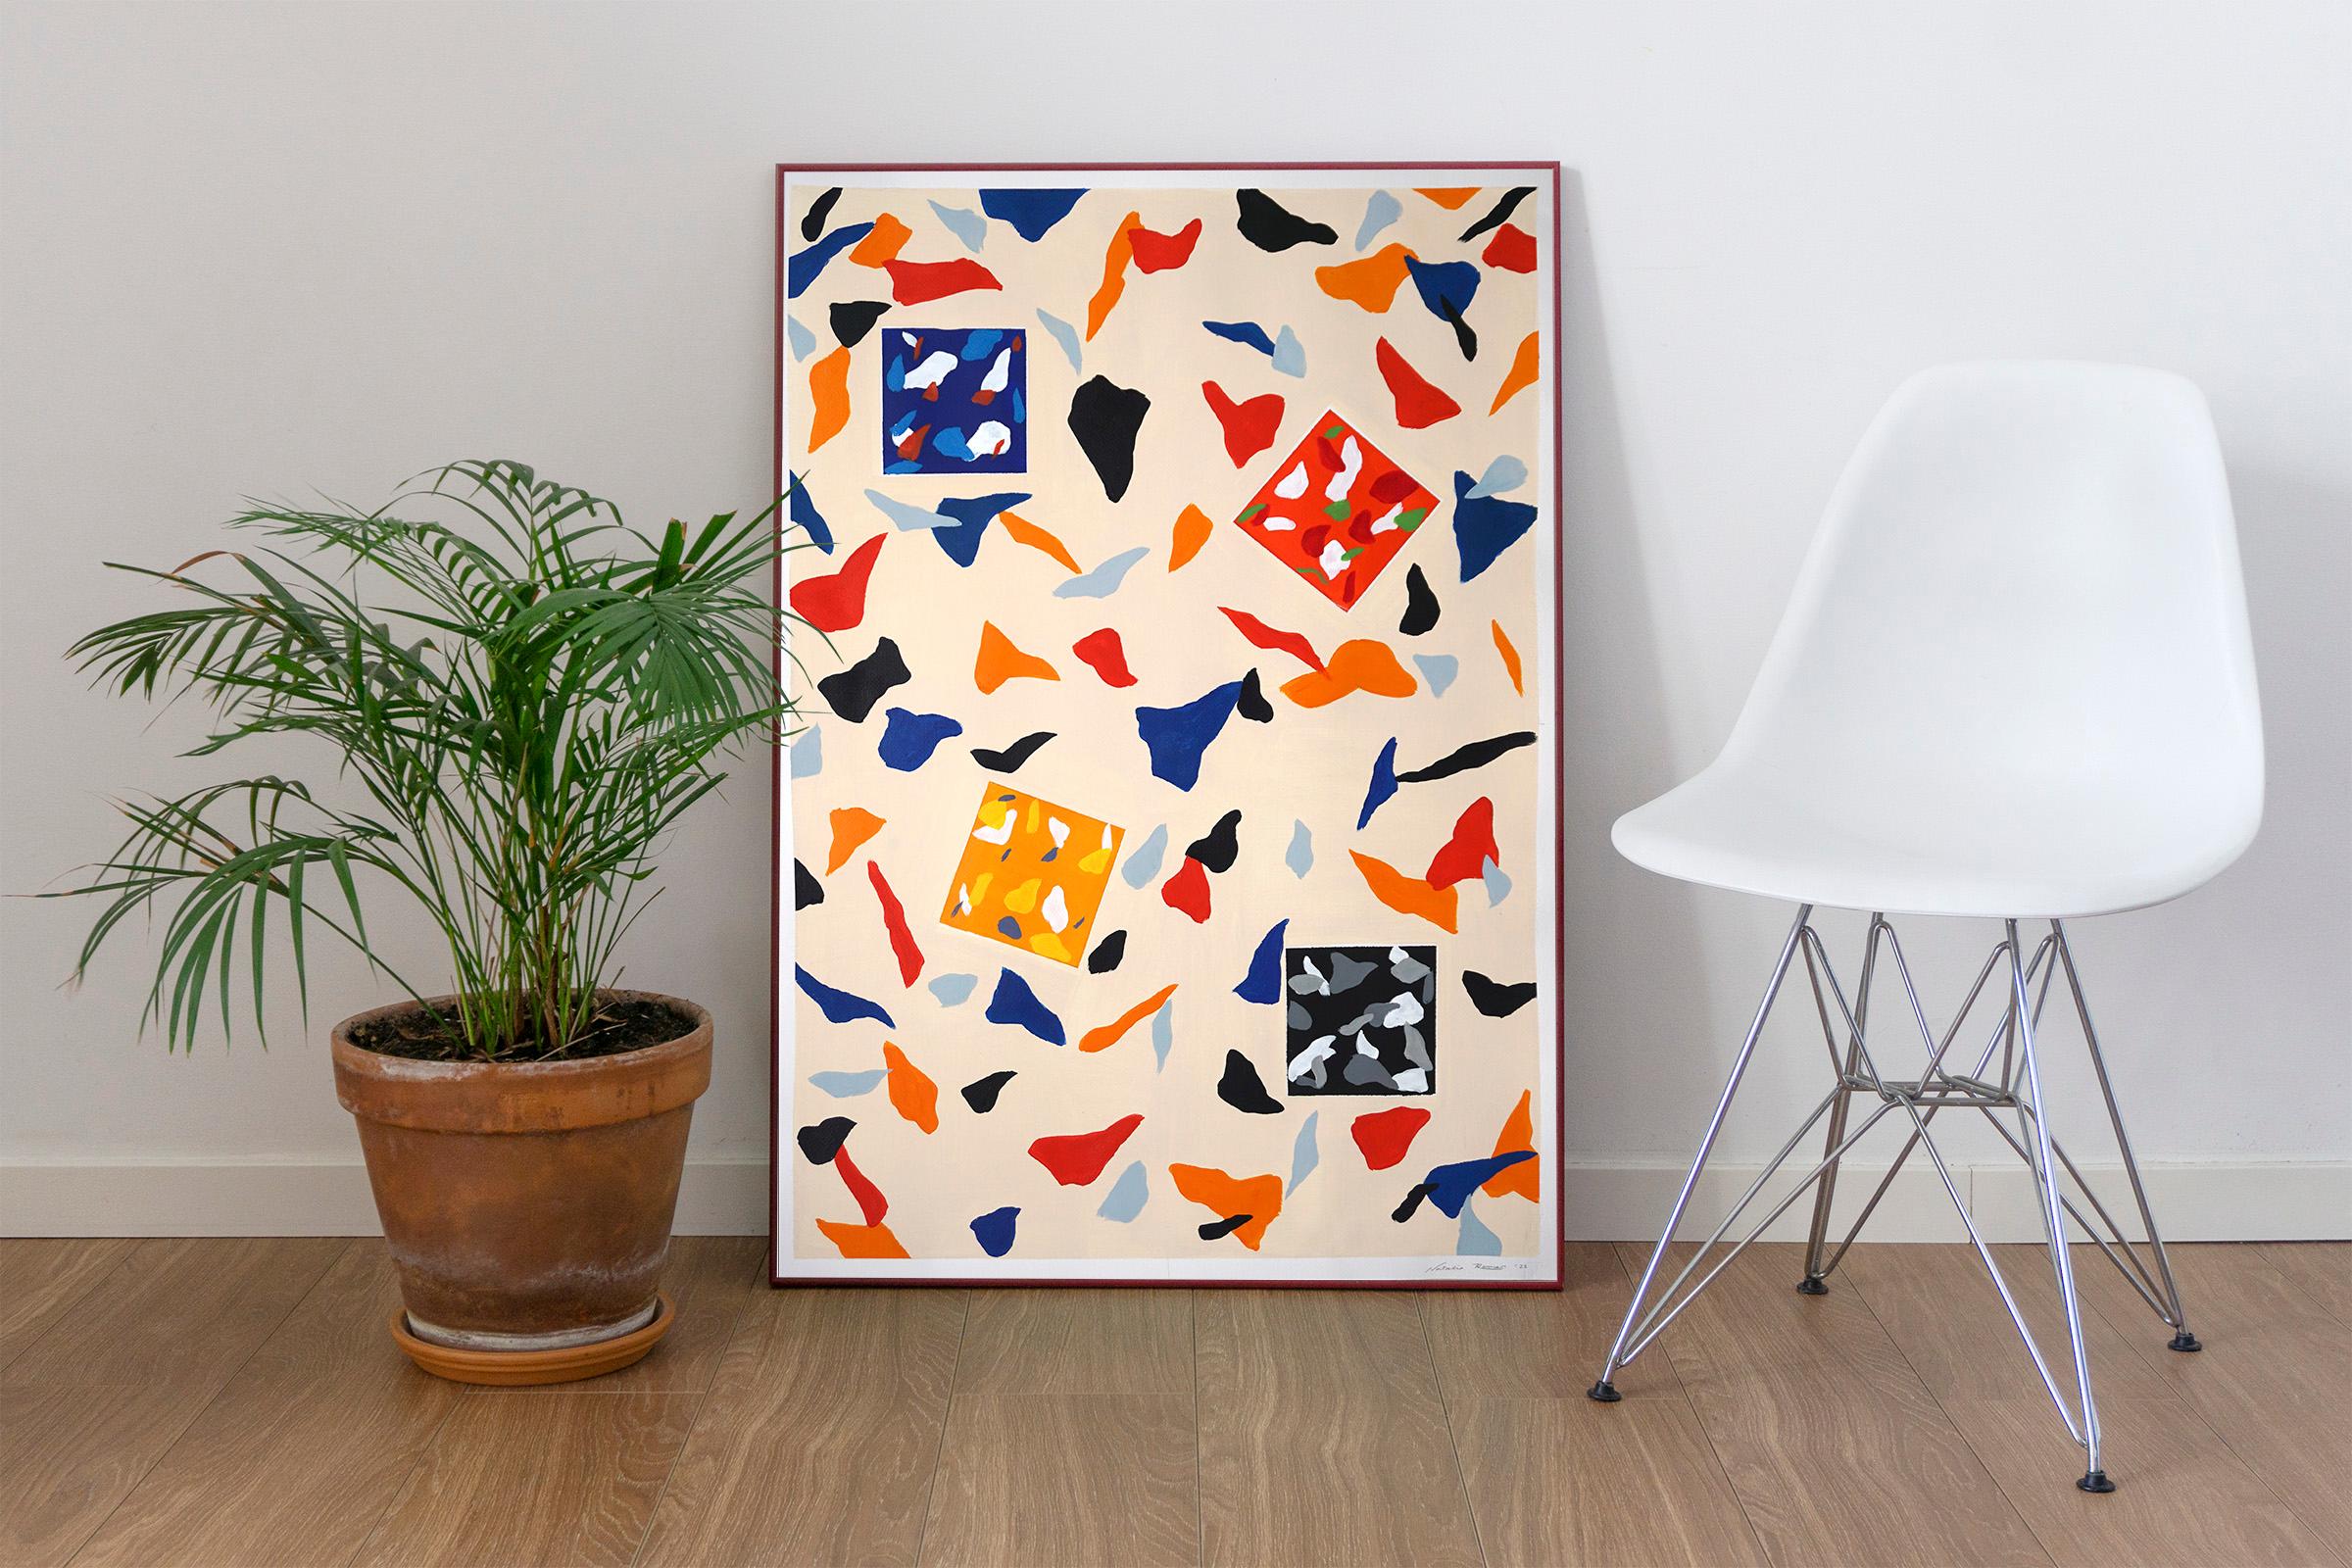 Primary Tones and Shapes De Stijl Terrazzo on Cream, Abstract Geometric Patterns - Painting by Natalia Roman